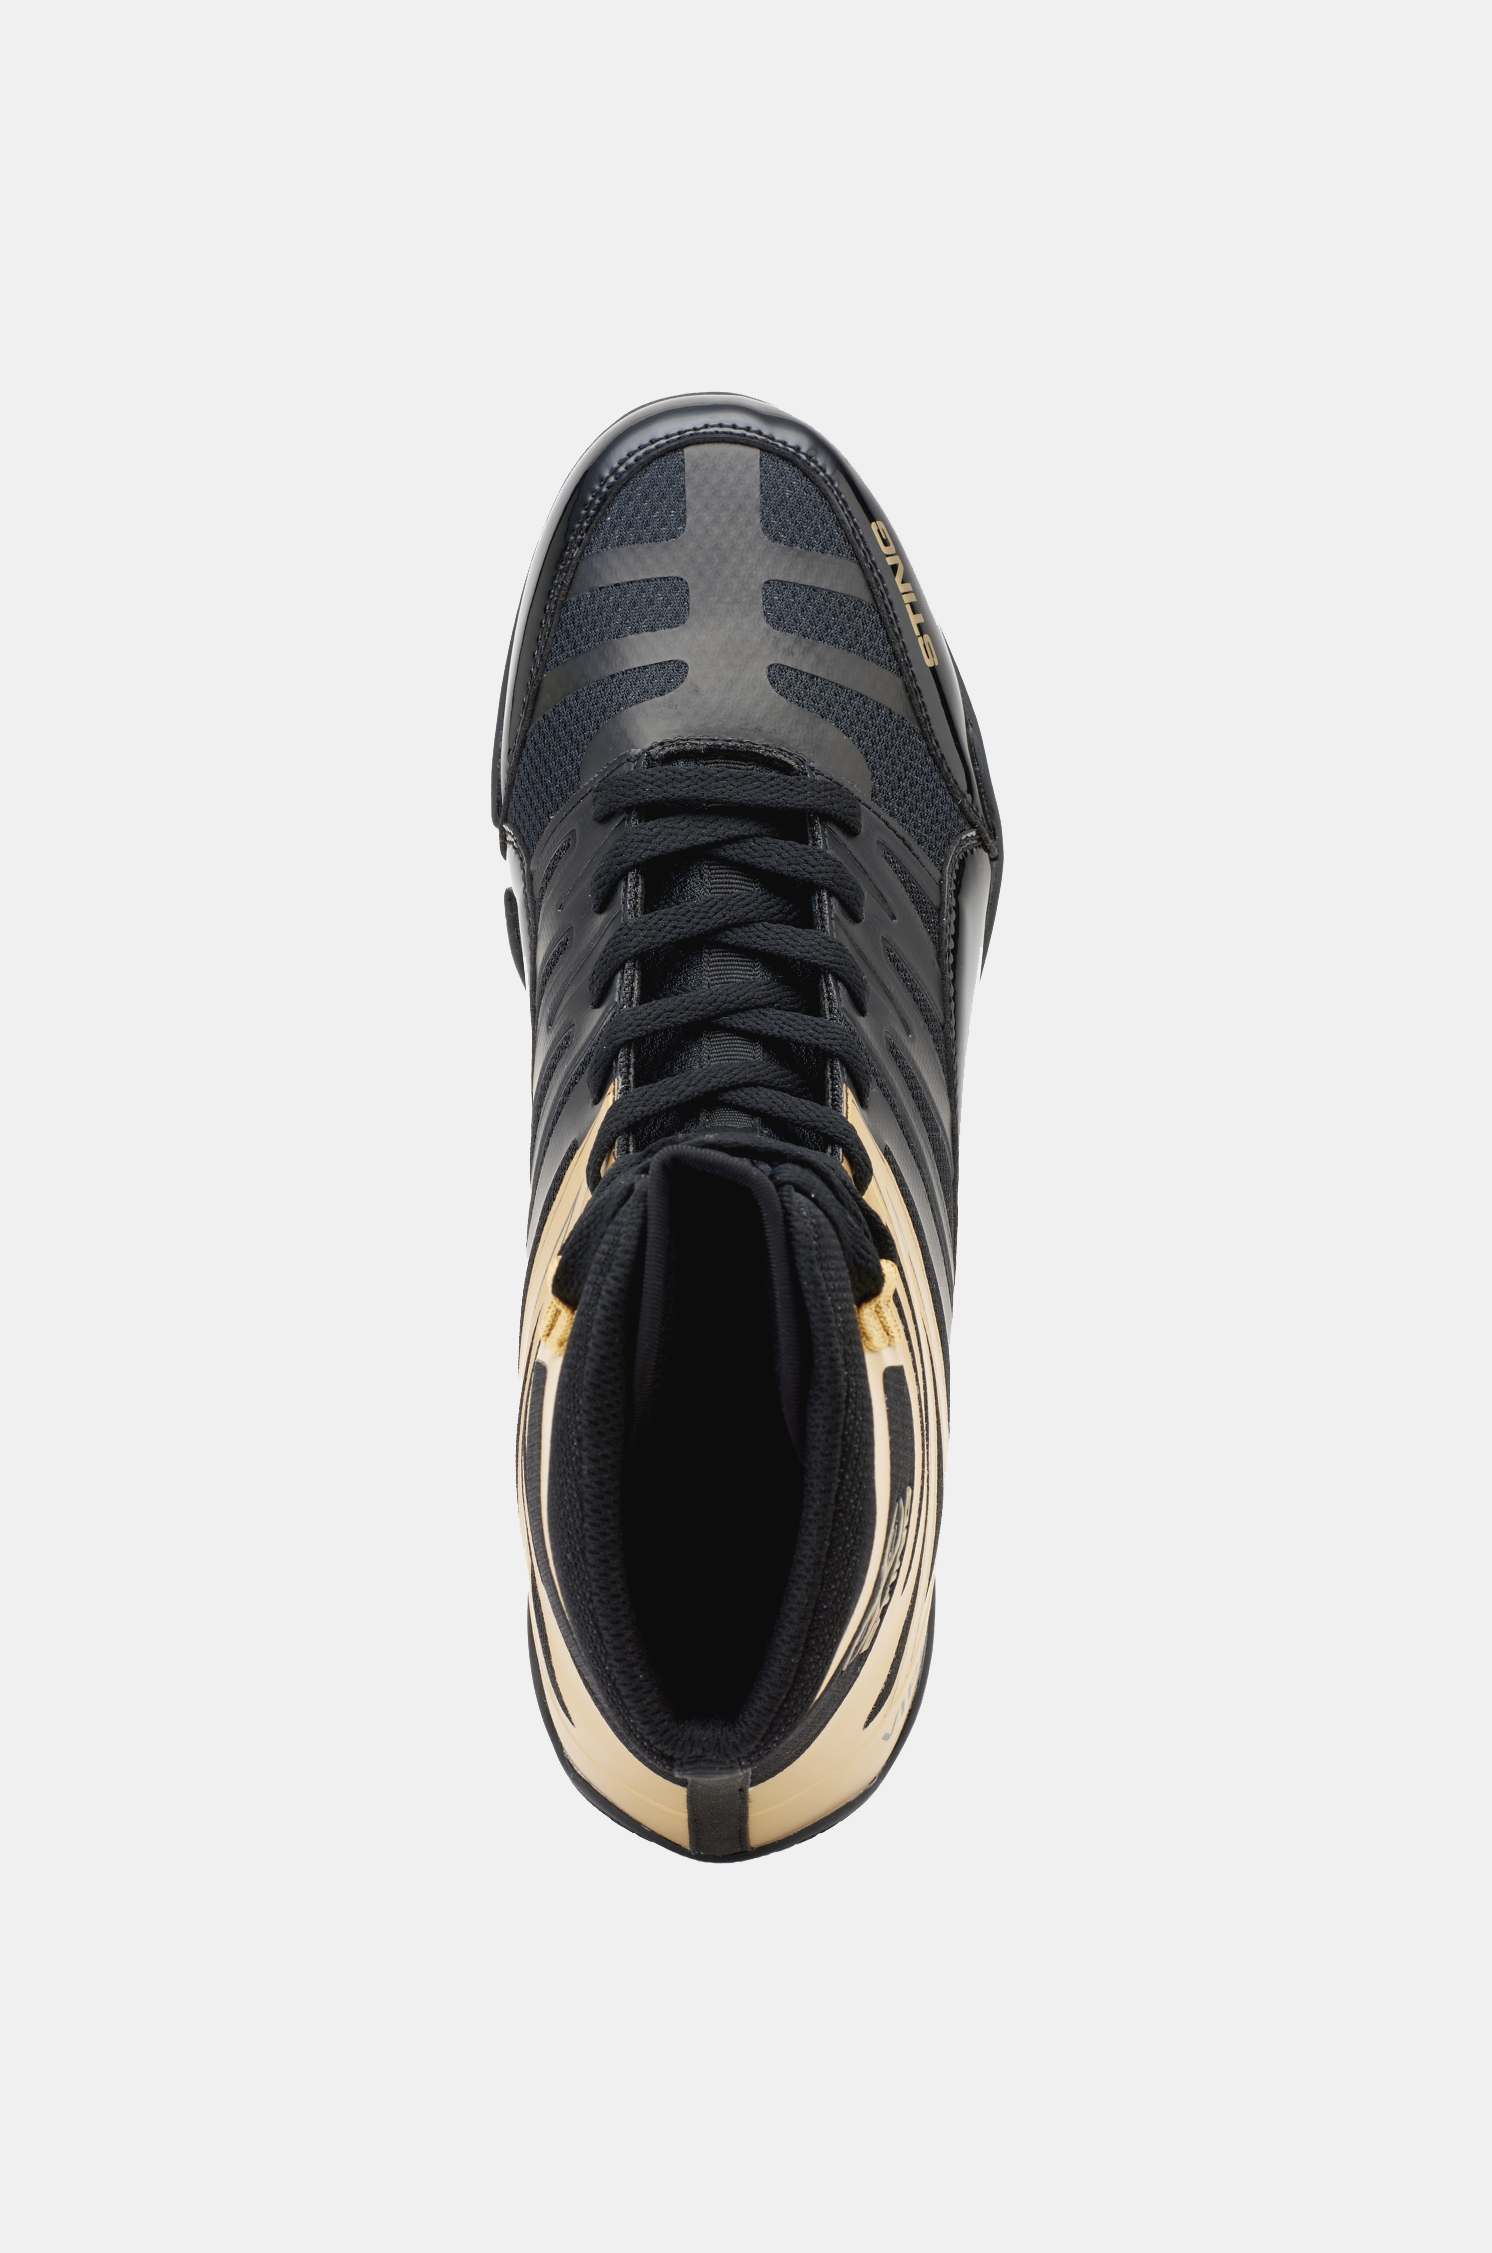 Looking For These Specific LV Trainers size US12 Black/White